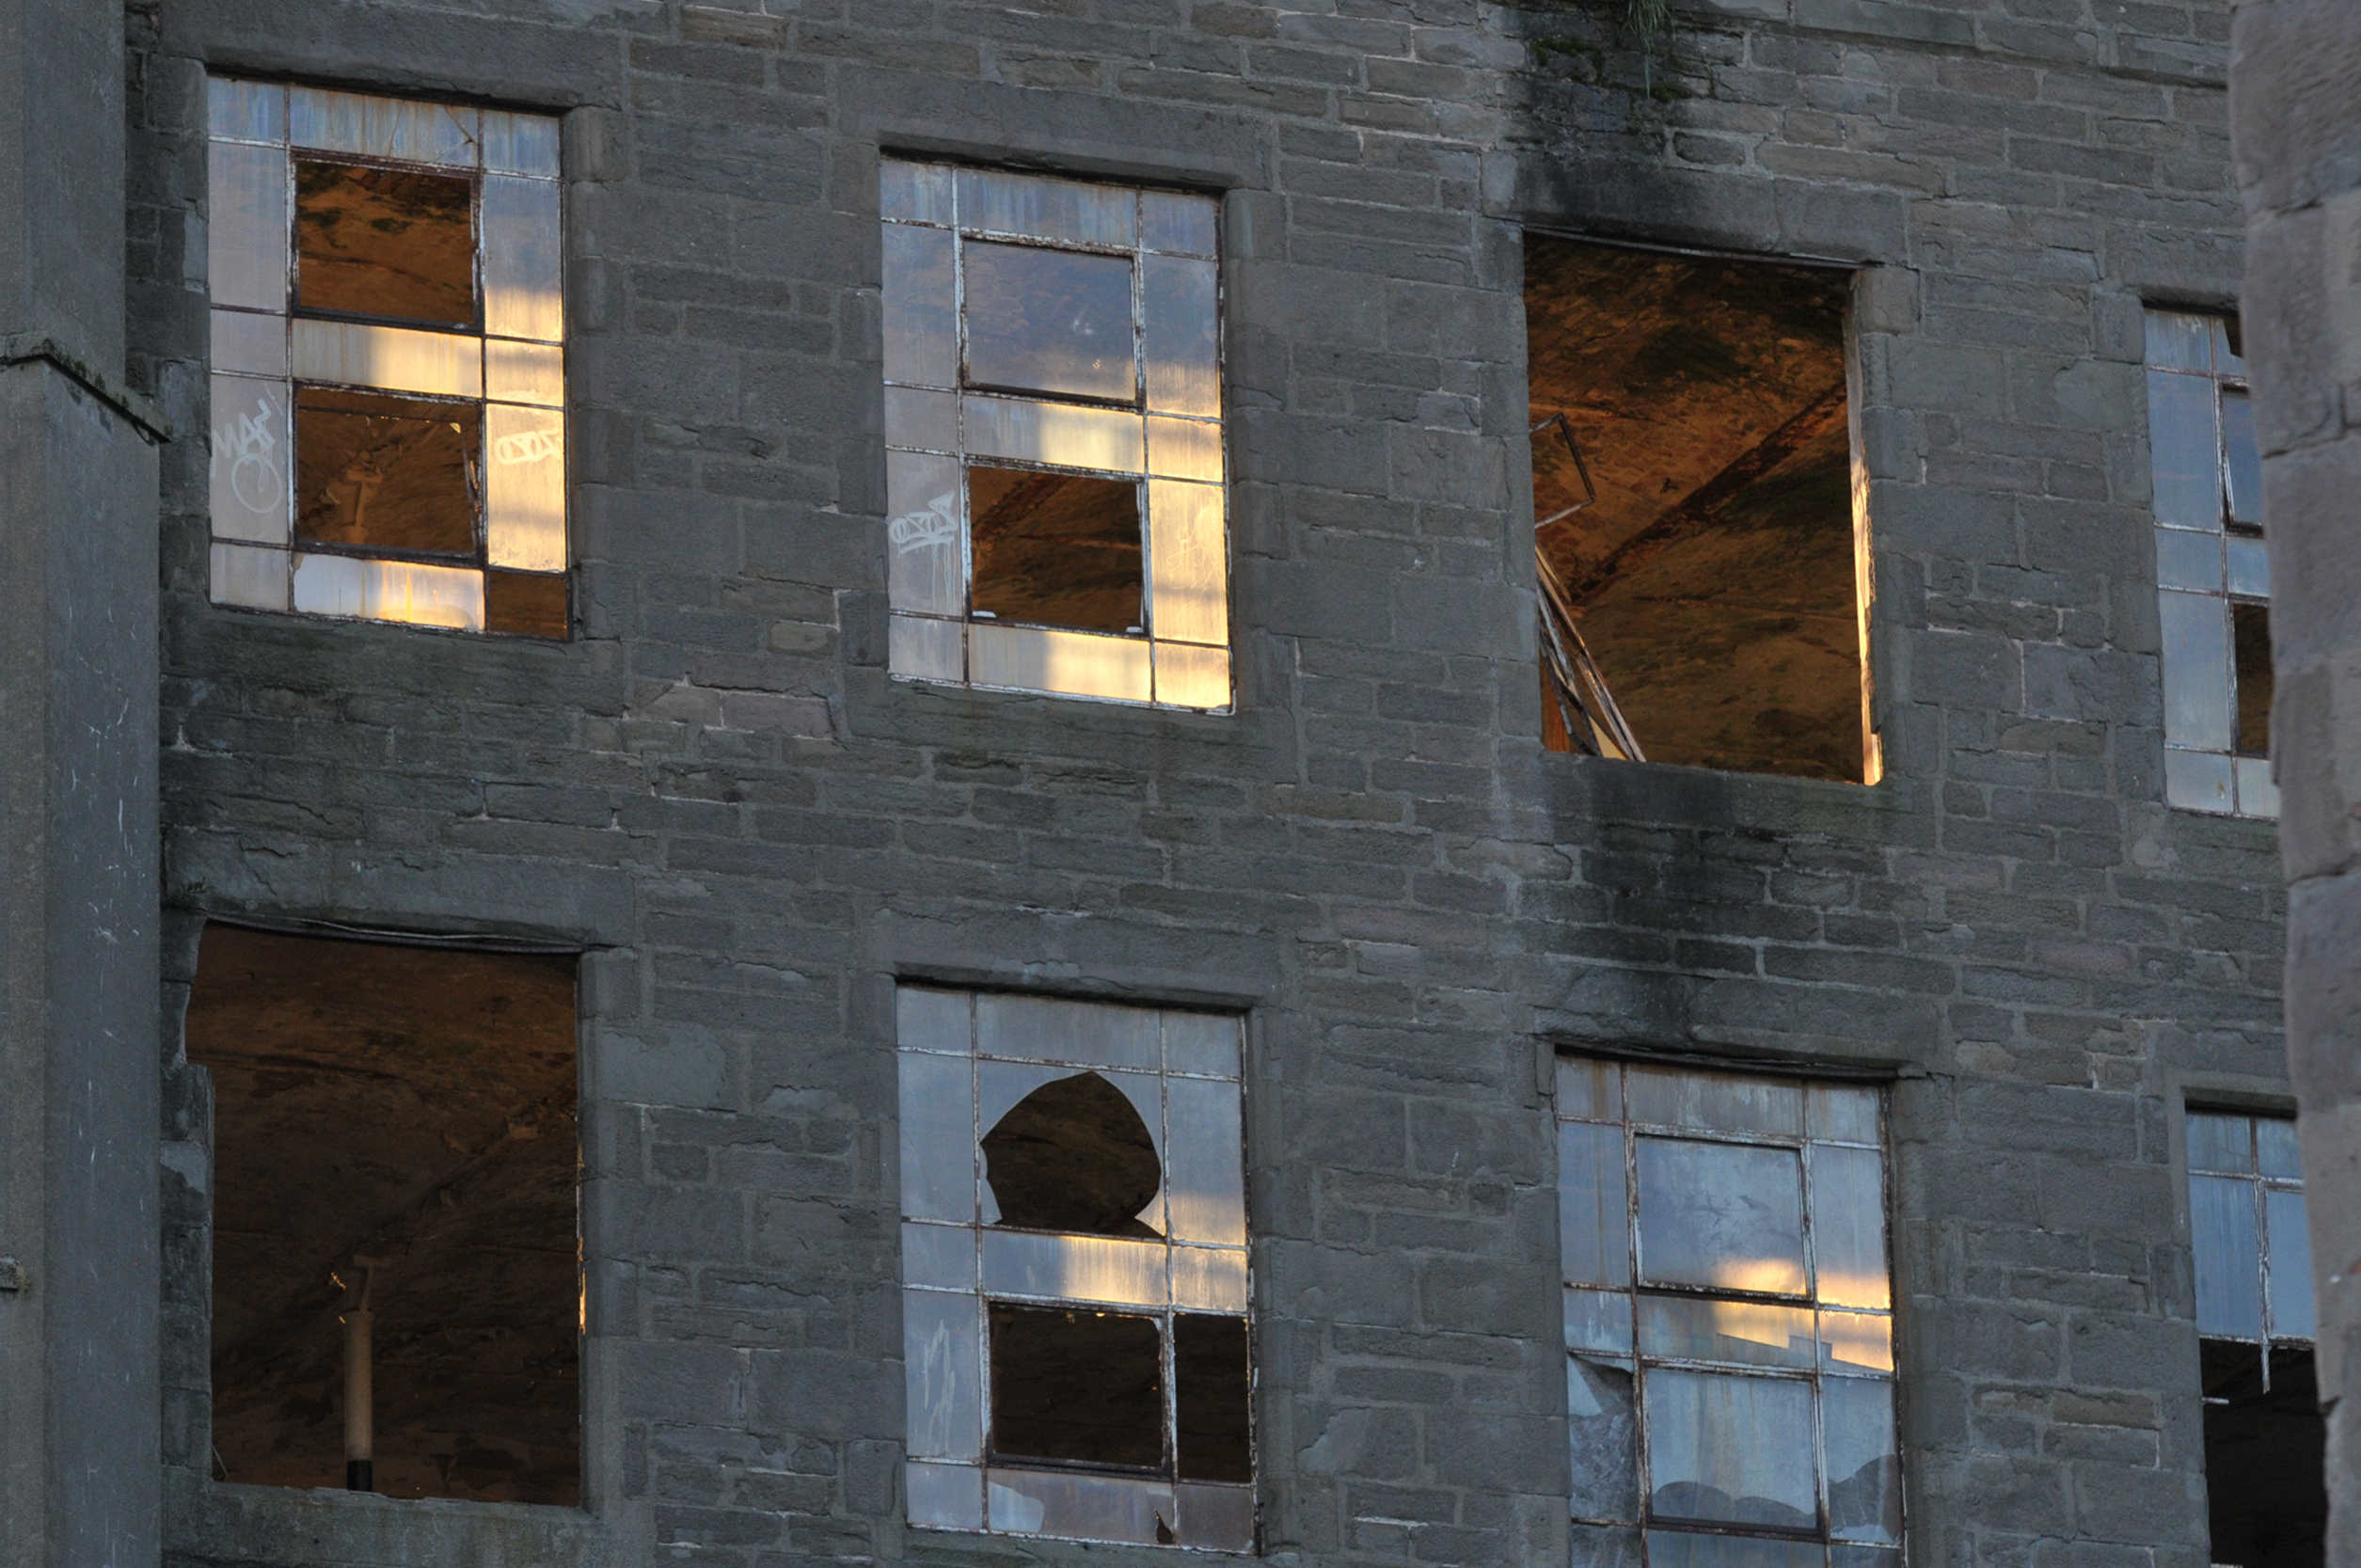 Breathing new life into Dundee's historic buildings - The Courier